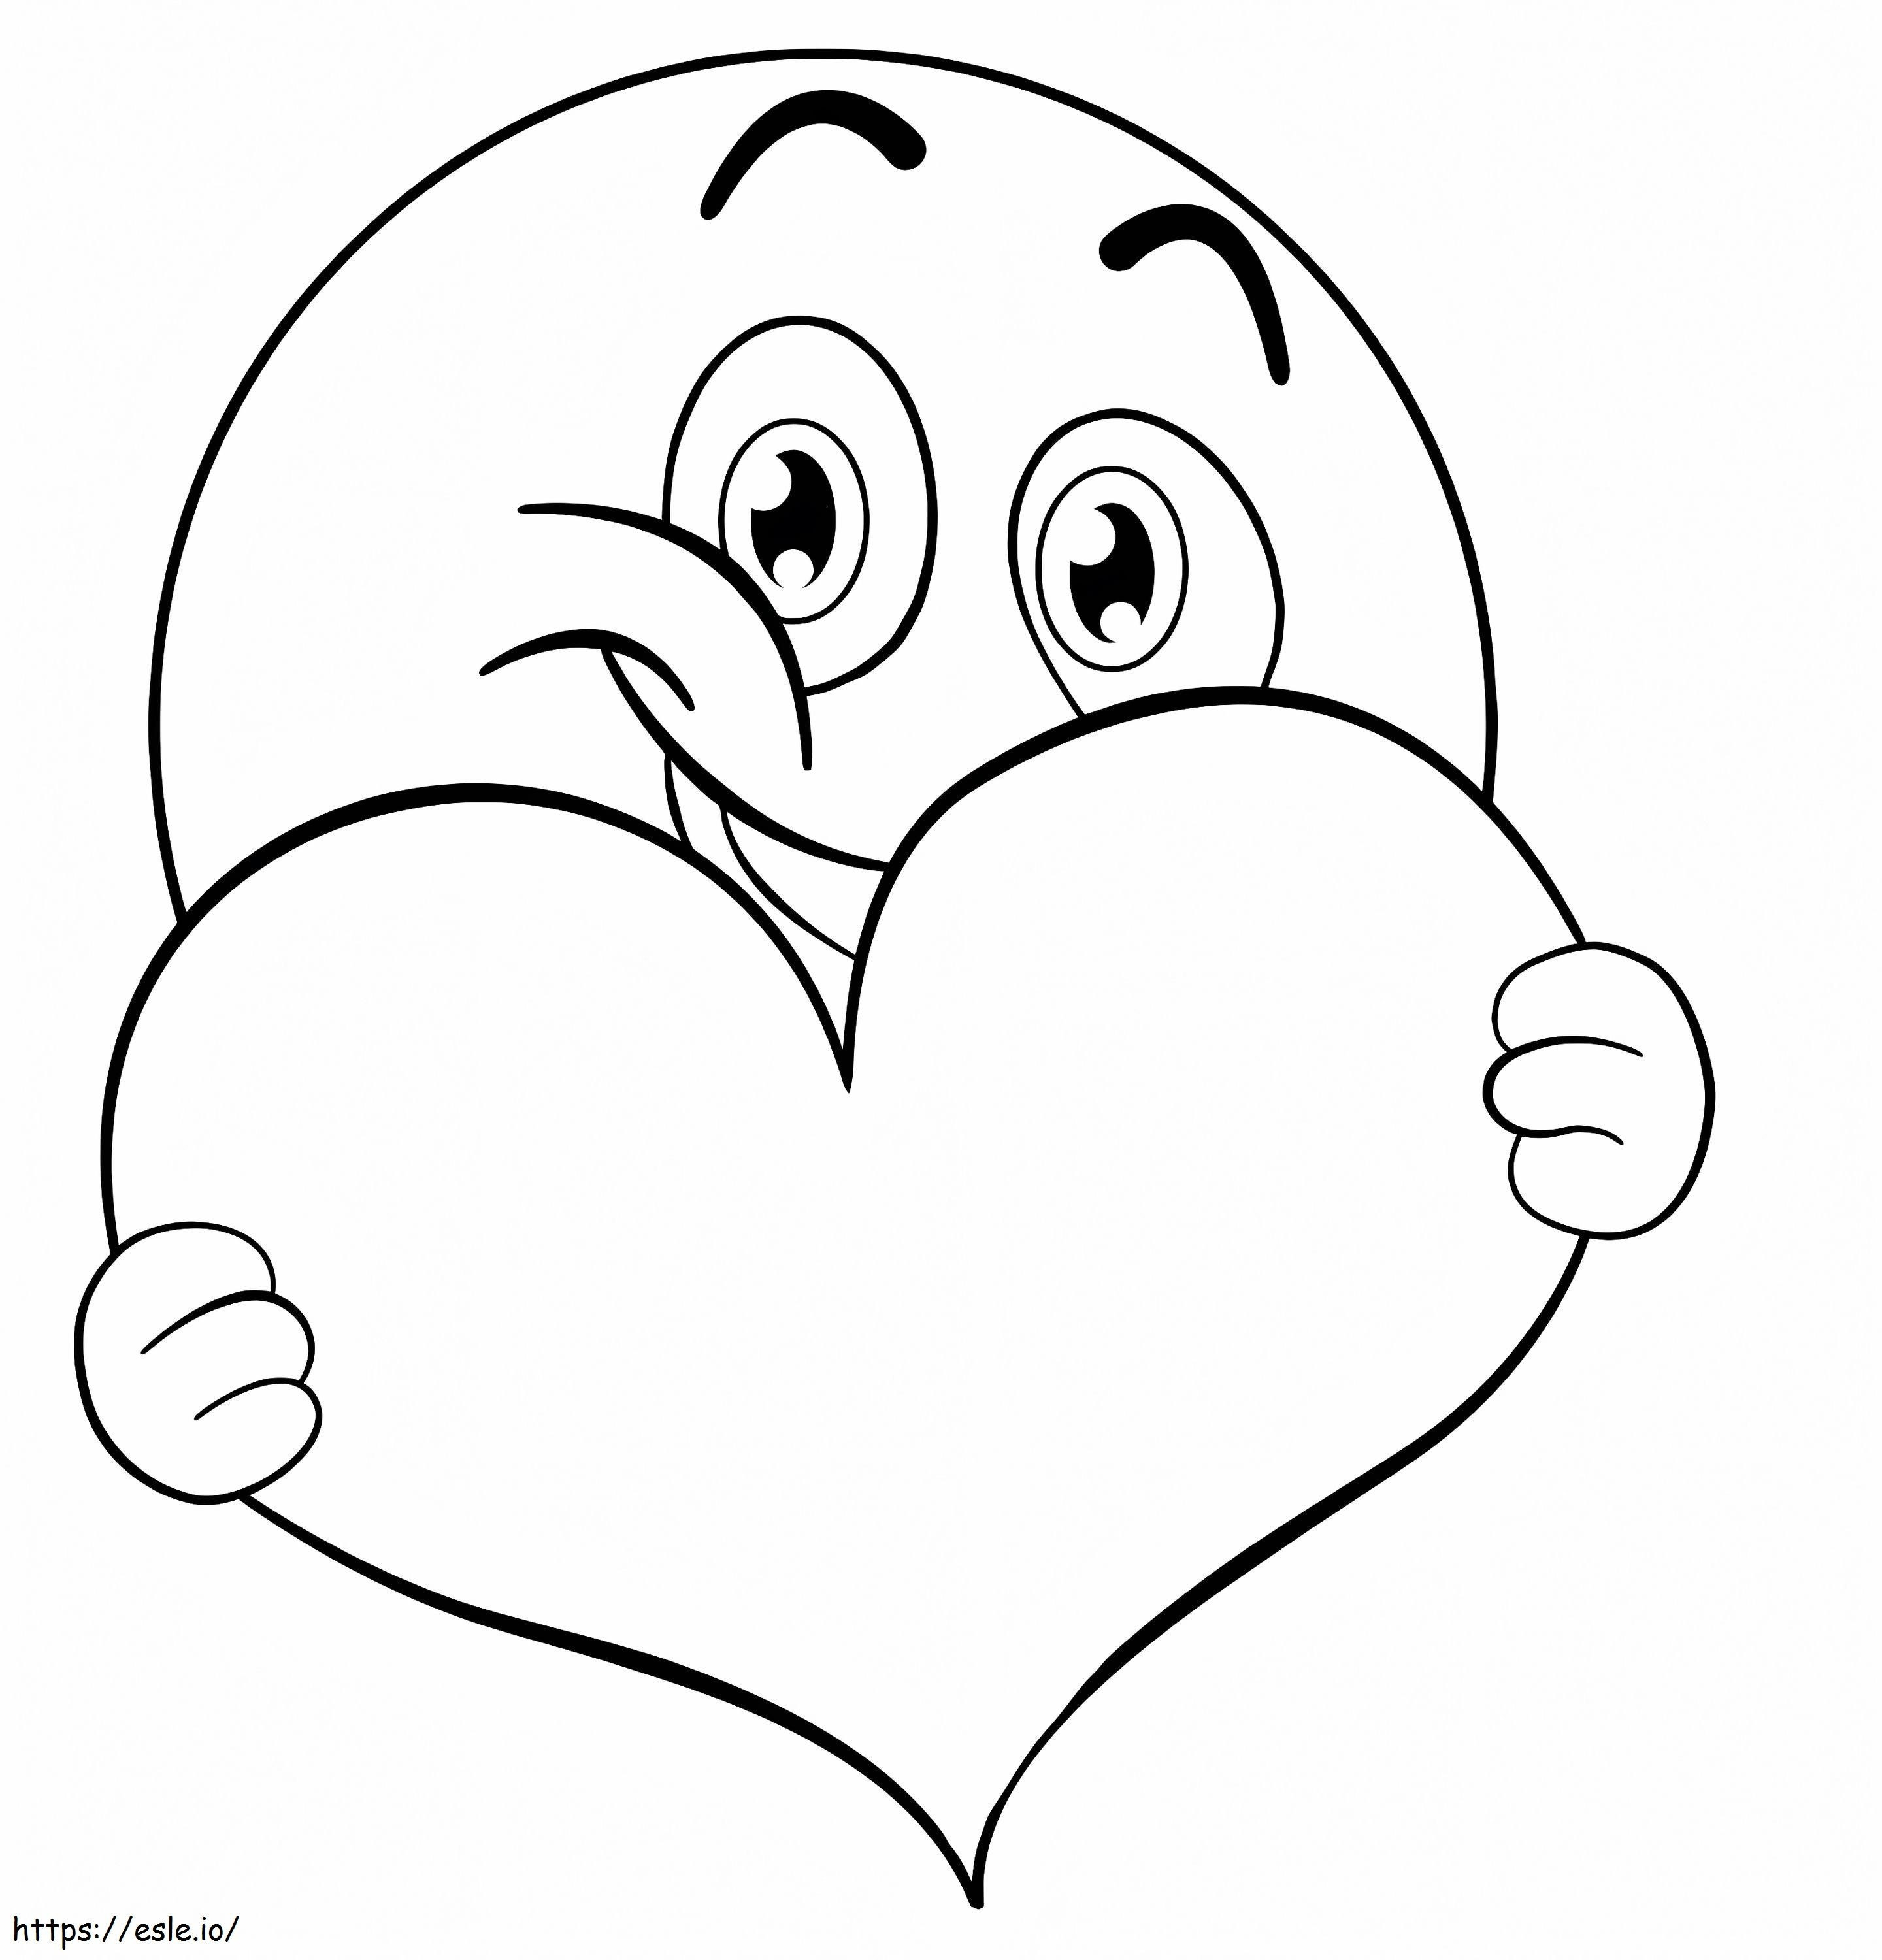 Emoji With Heart coloring page